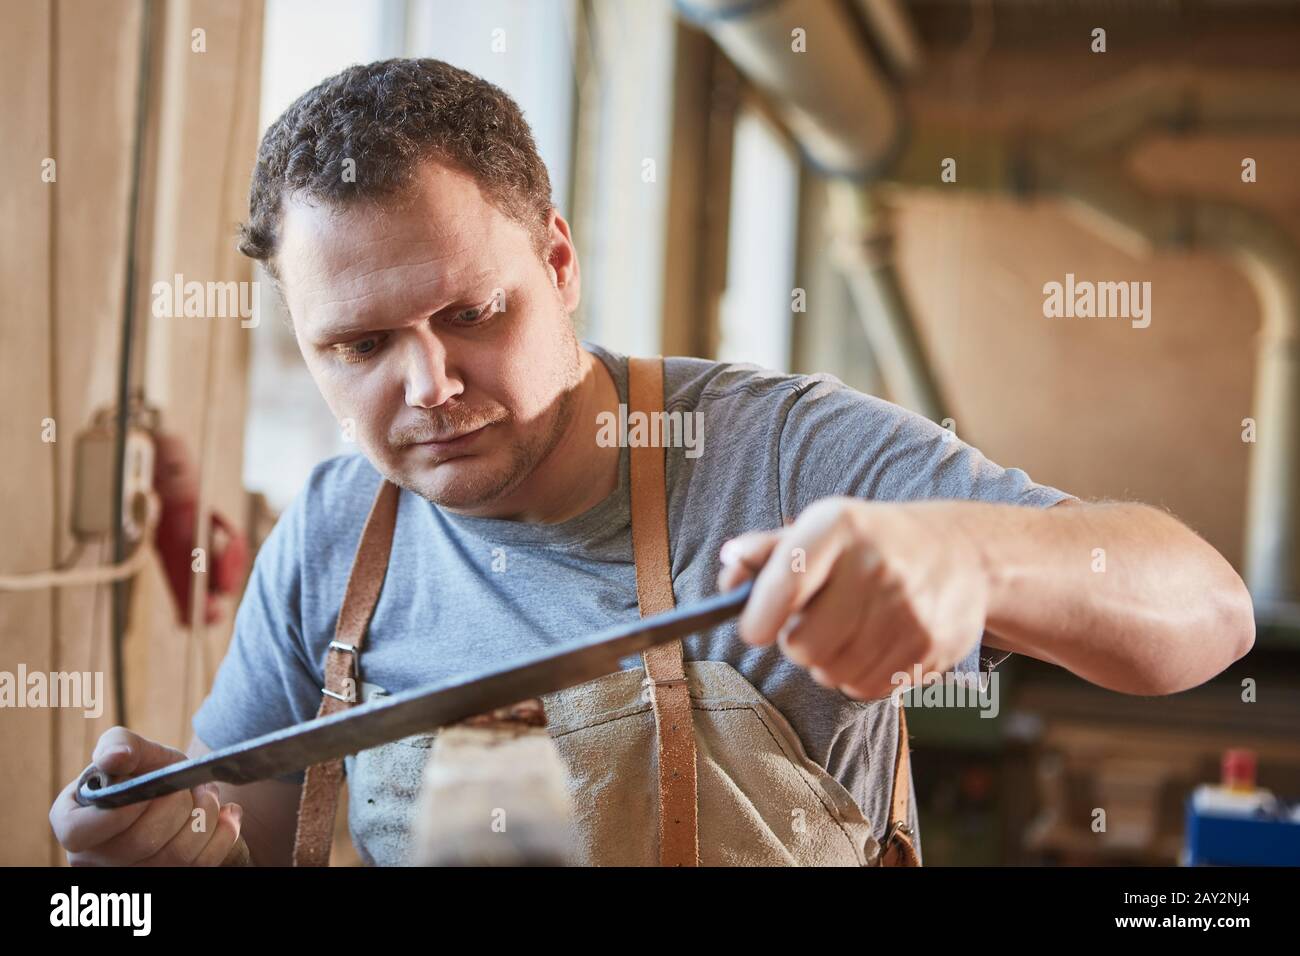 Craftsman apprentice with a tension knife for debarking wood Stock Photo